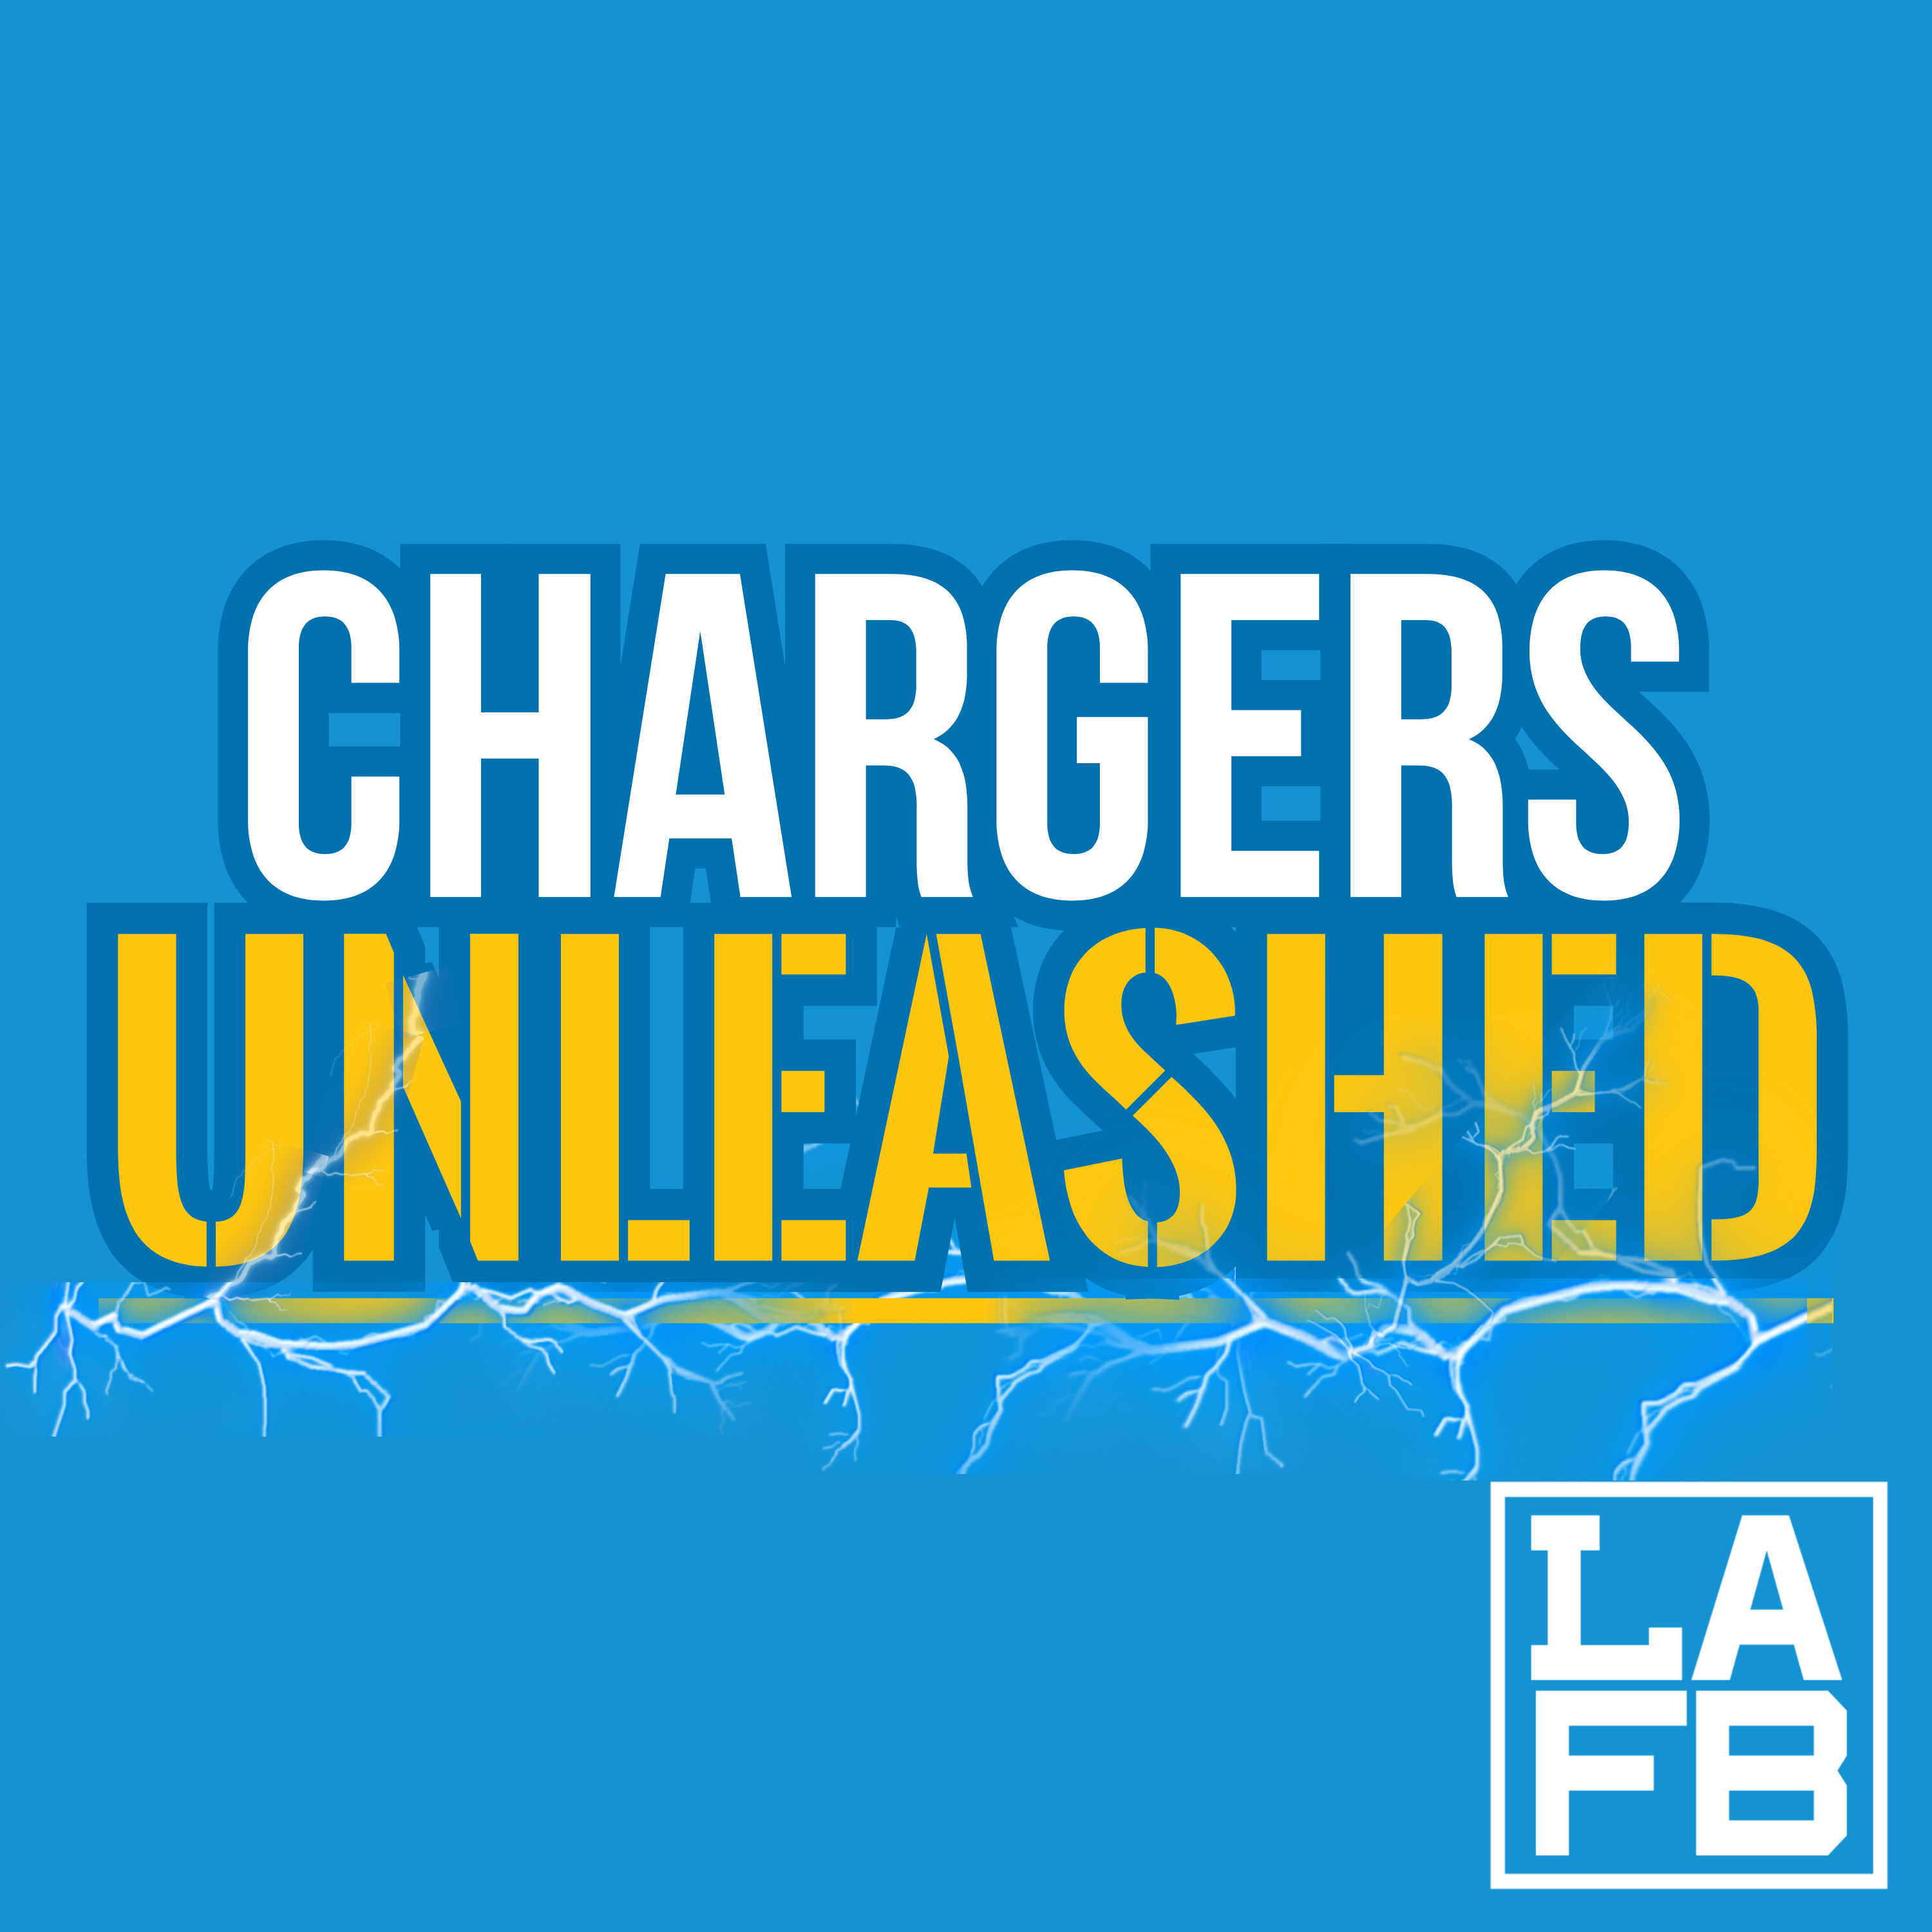 Ep. 273 - Chargers vs Lions Week 10 Recap & Takeaways | Defense Crumbles & Hangs Offense Out To Dry